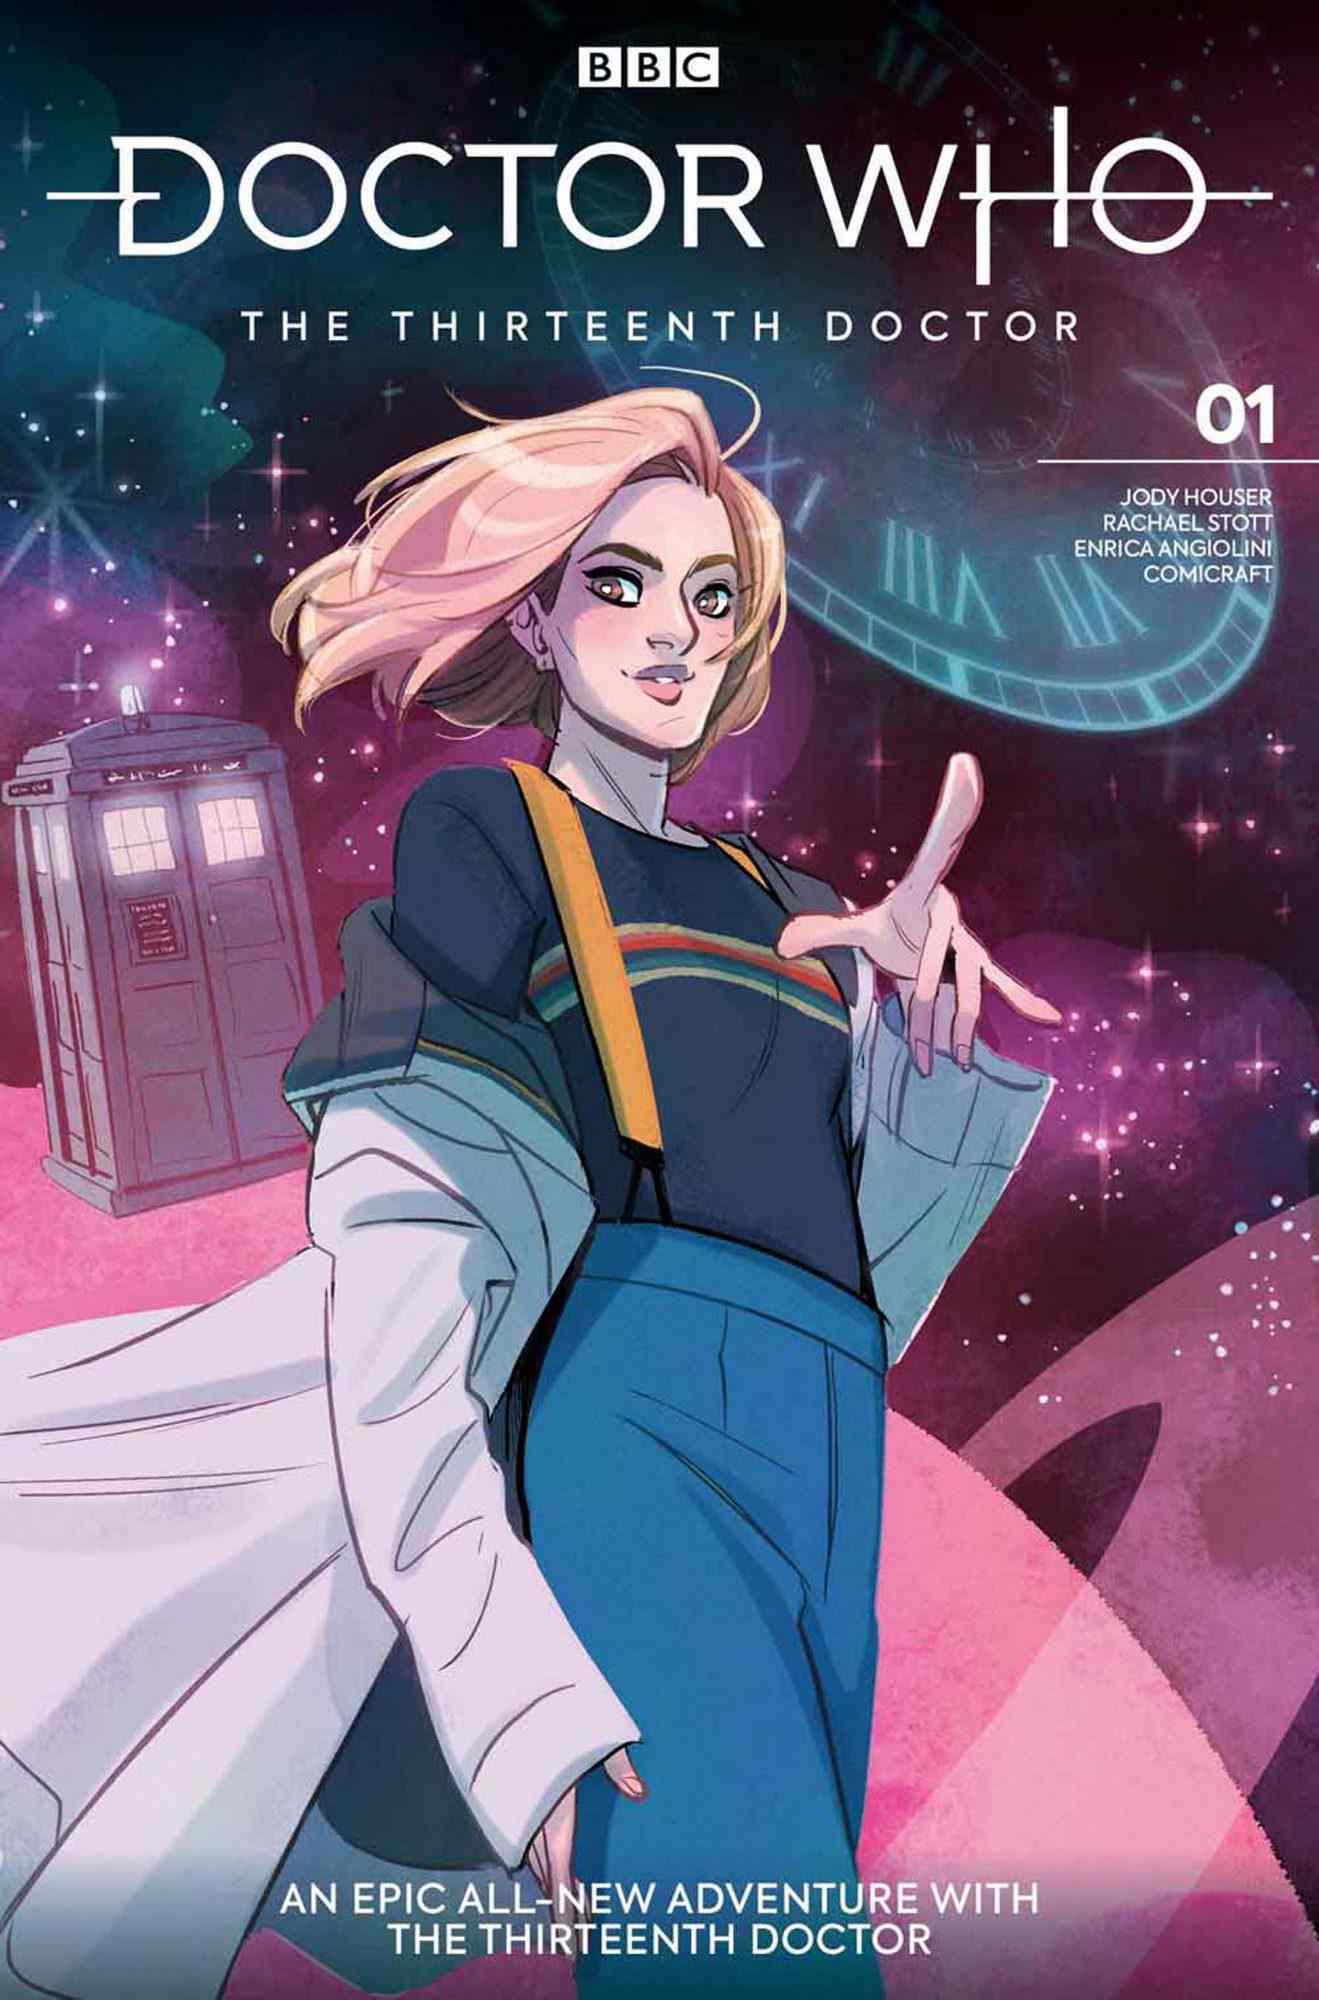 Doctor Who #1 Variant CoversThe Thirteenth DoctorCredit: Titan Comics